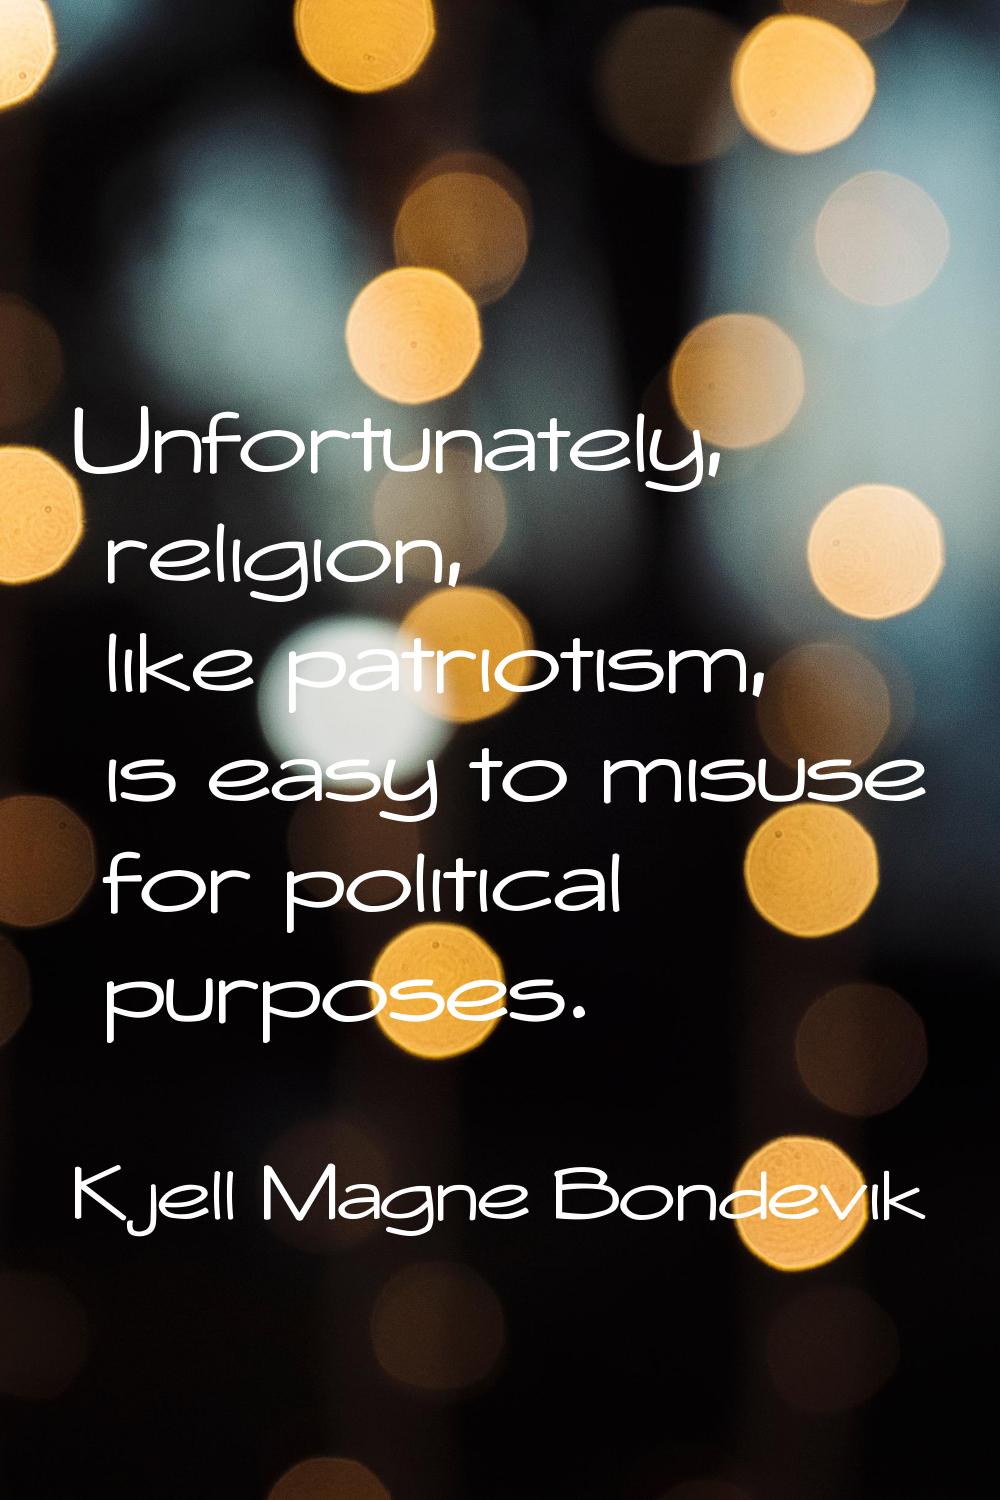 Unfortunately, religion, like patriotism, is easy to misuse for political purposes.